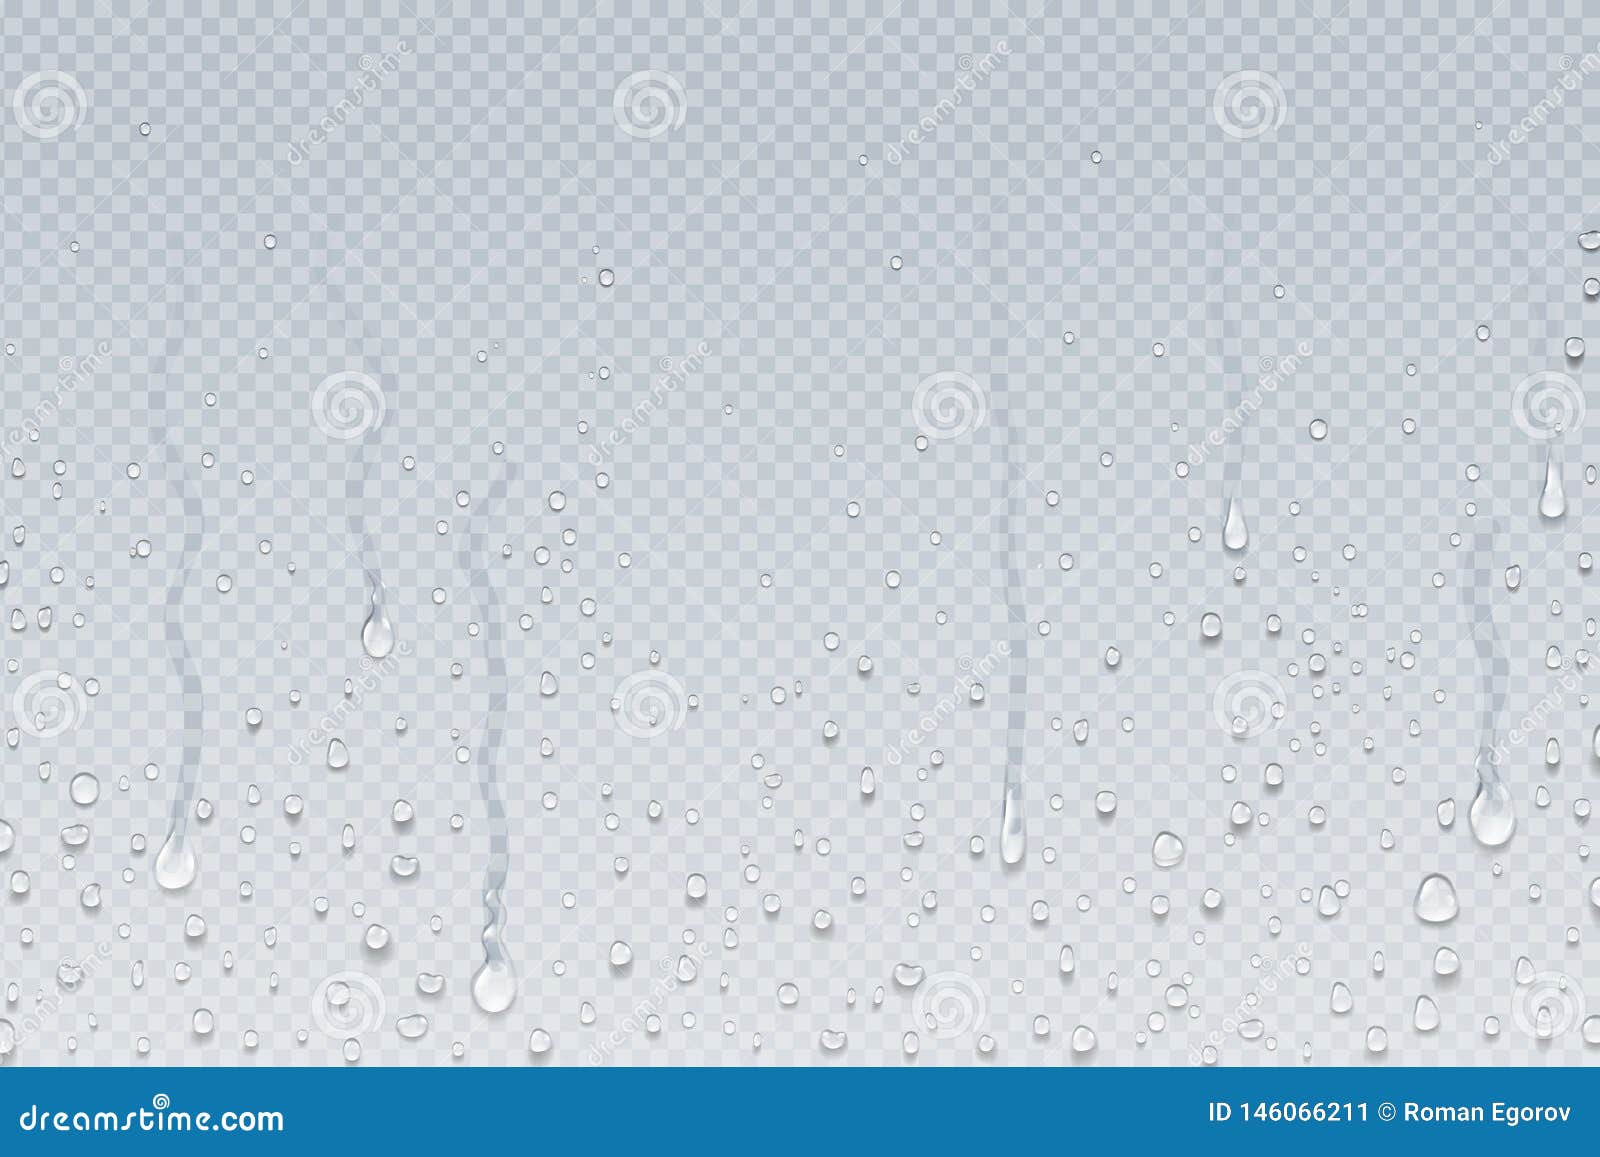 water drops background. shower steam condensation drips on transparent glass, rain drops on window.  realistic